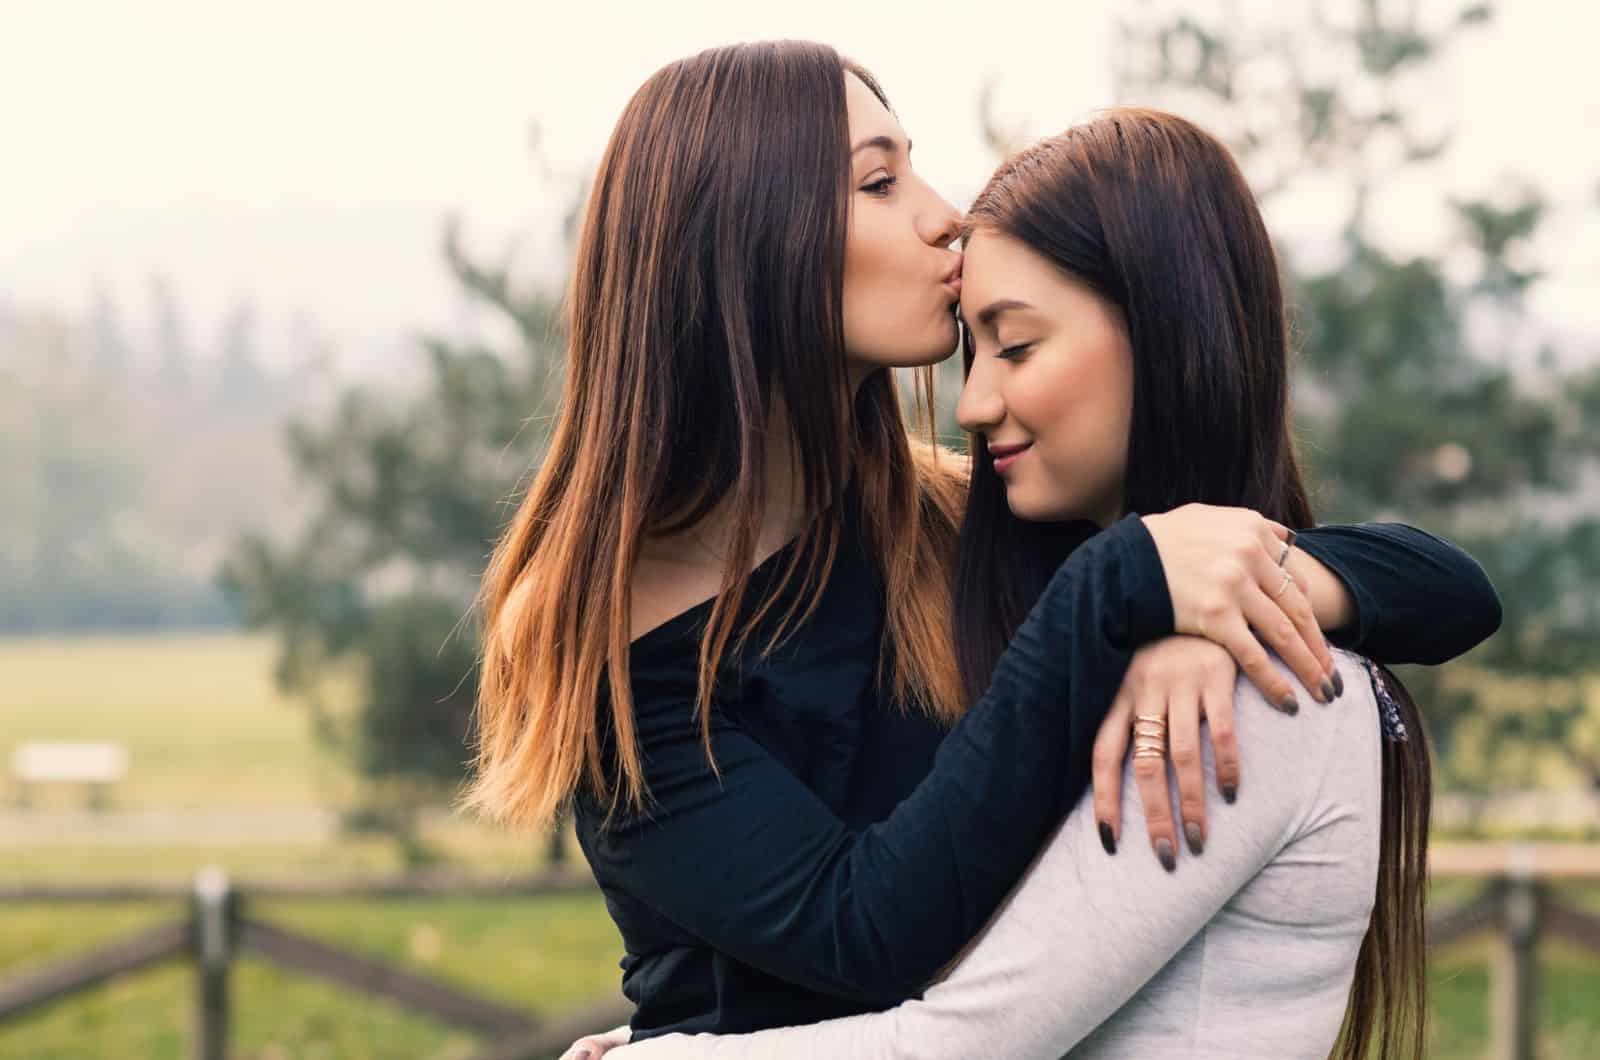 young sisters hugging and kissing outdoors in a park